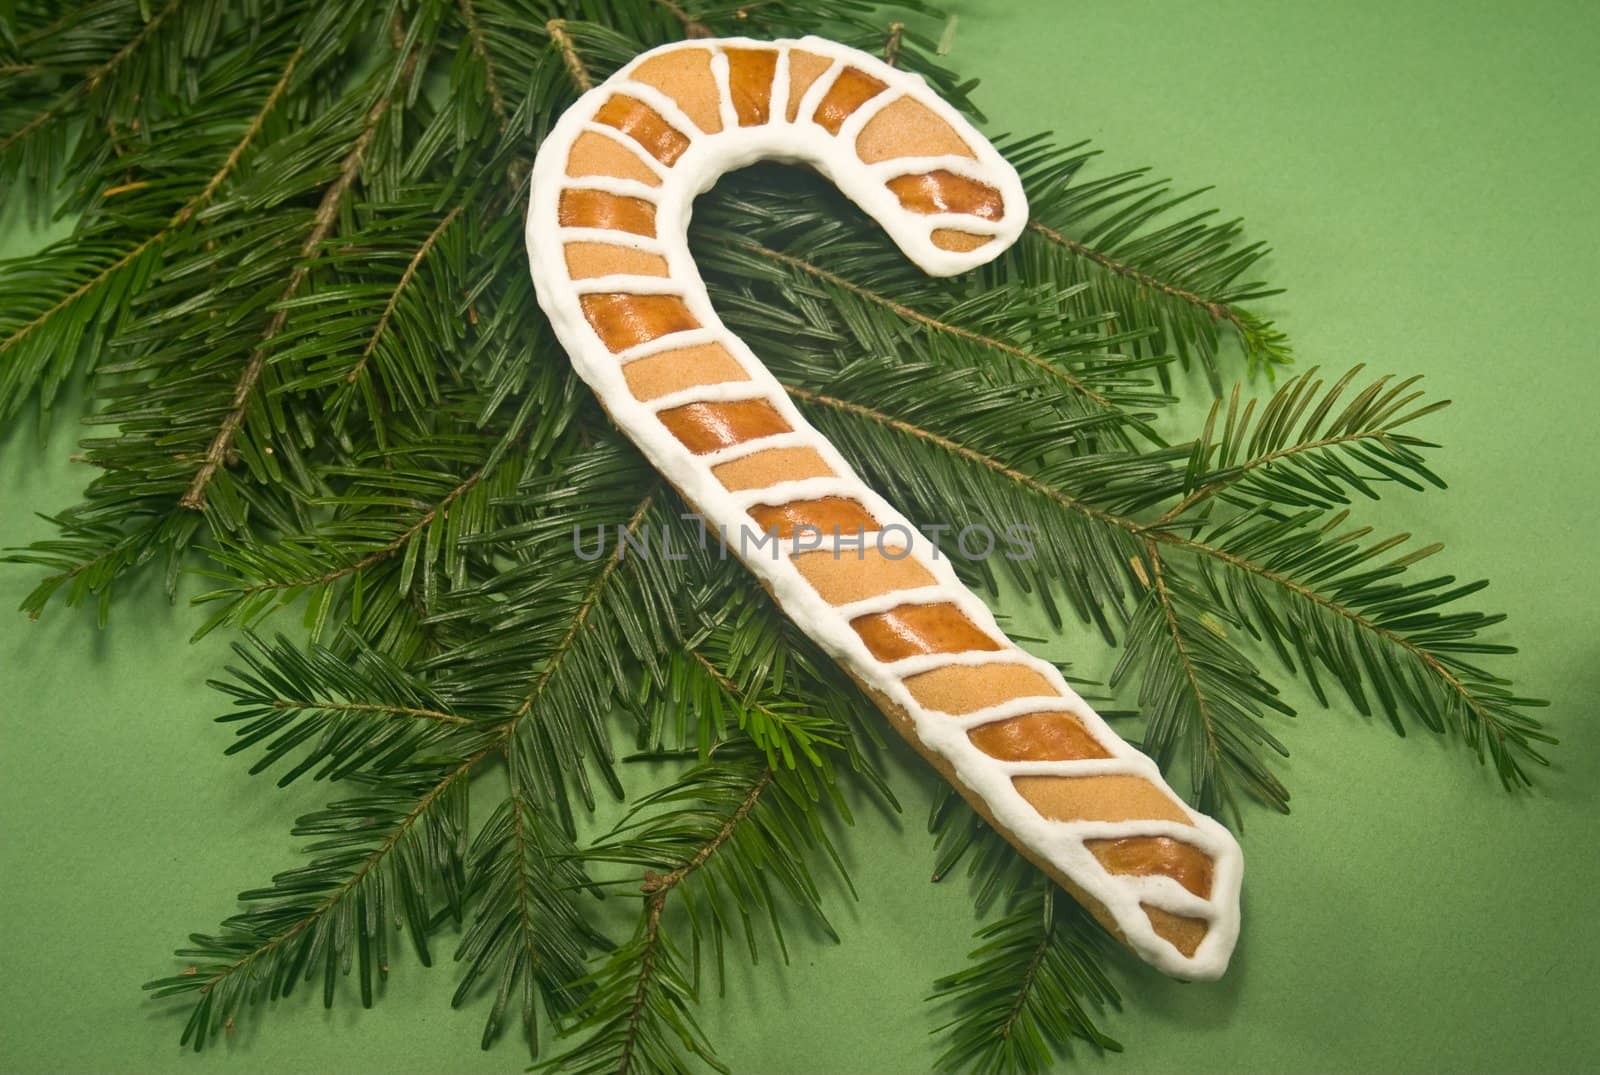 Candy cane cookie with fir branch isolated on green paper